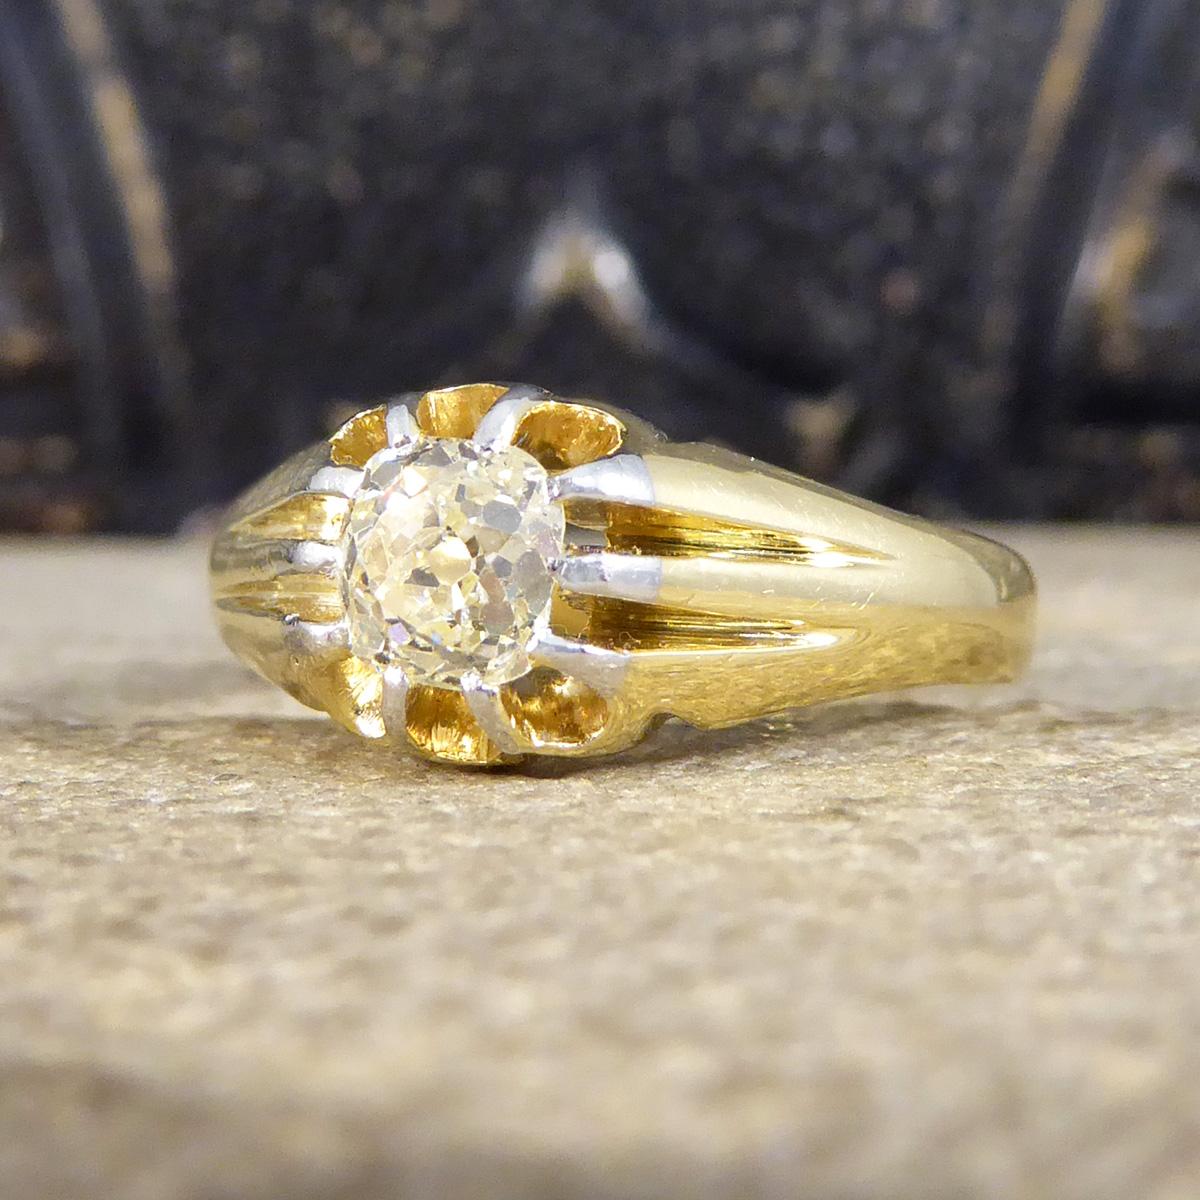 Antique Late Victorian Old Cushion Cut Diamond Ring in 18ct Gold &Plat For Sale 1